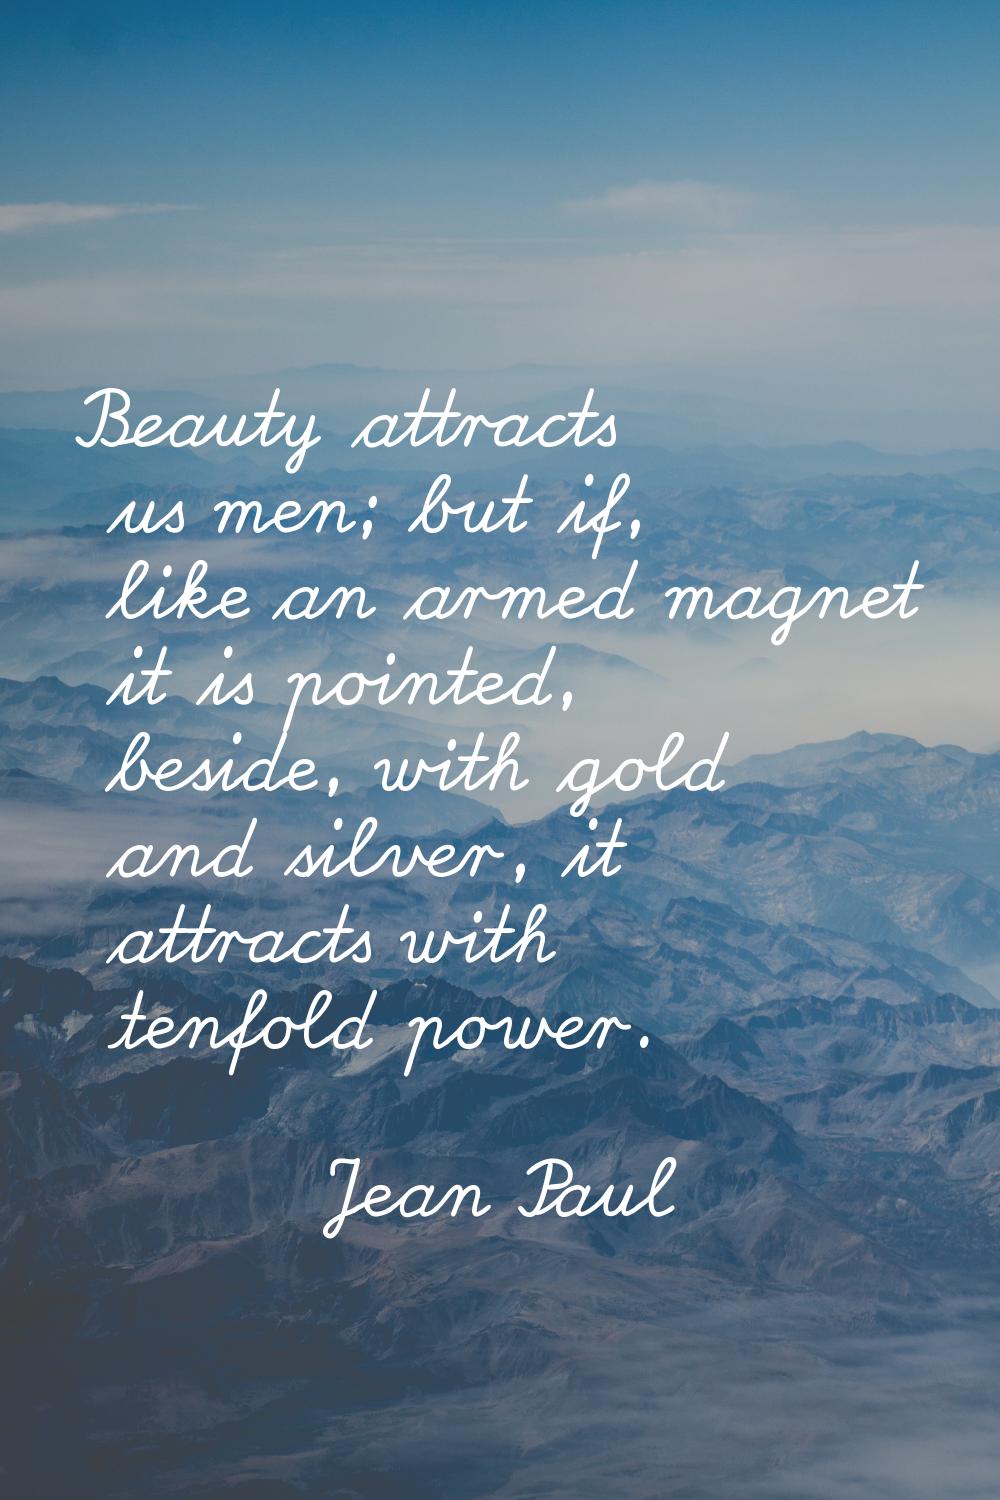 Beauty attracts us men; but if, like an armed magnet it is pointed, beside, with gold and silver, i